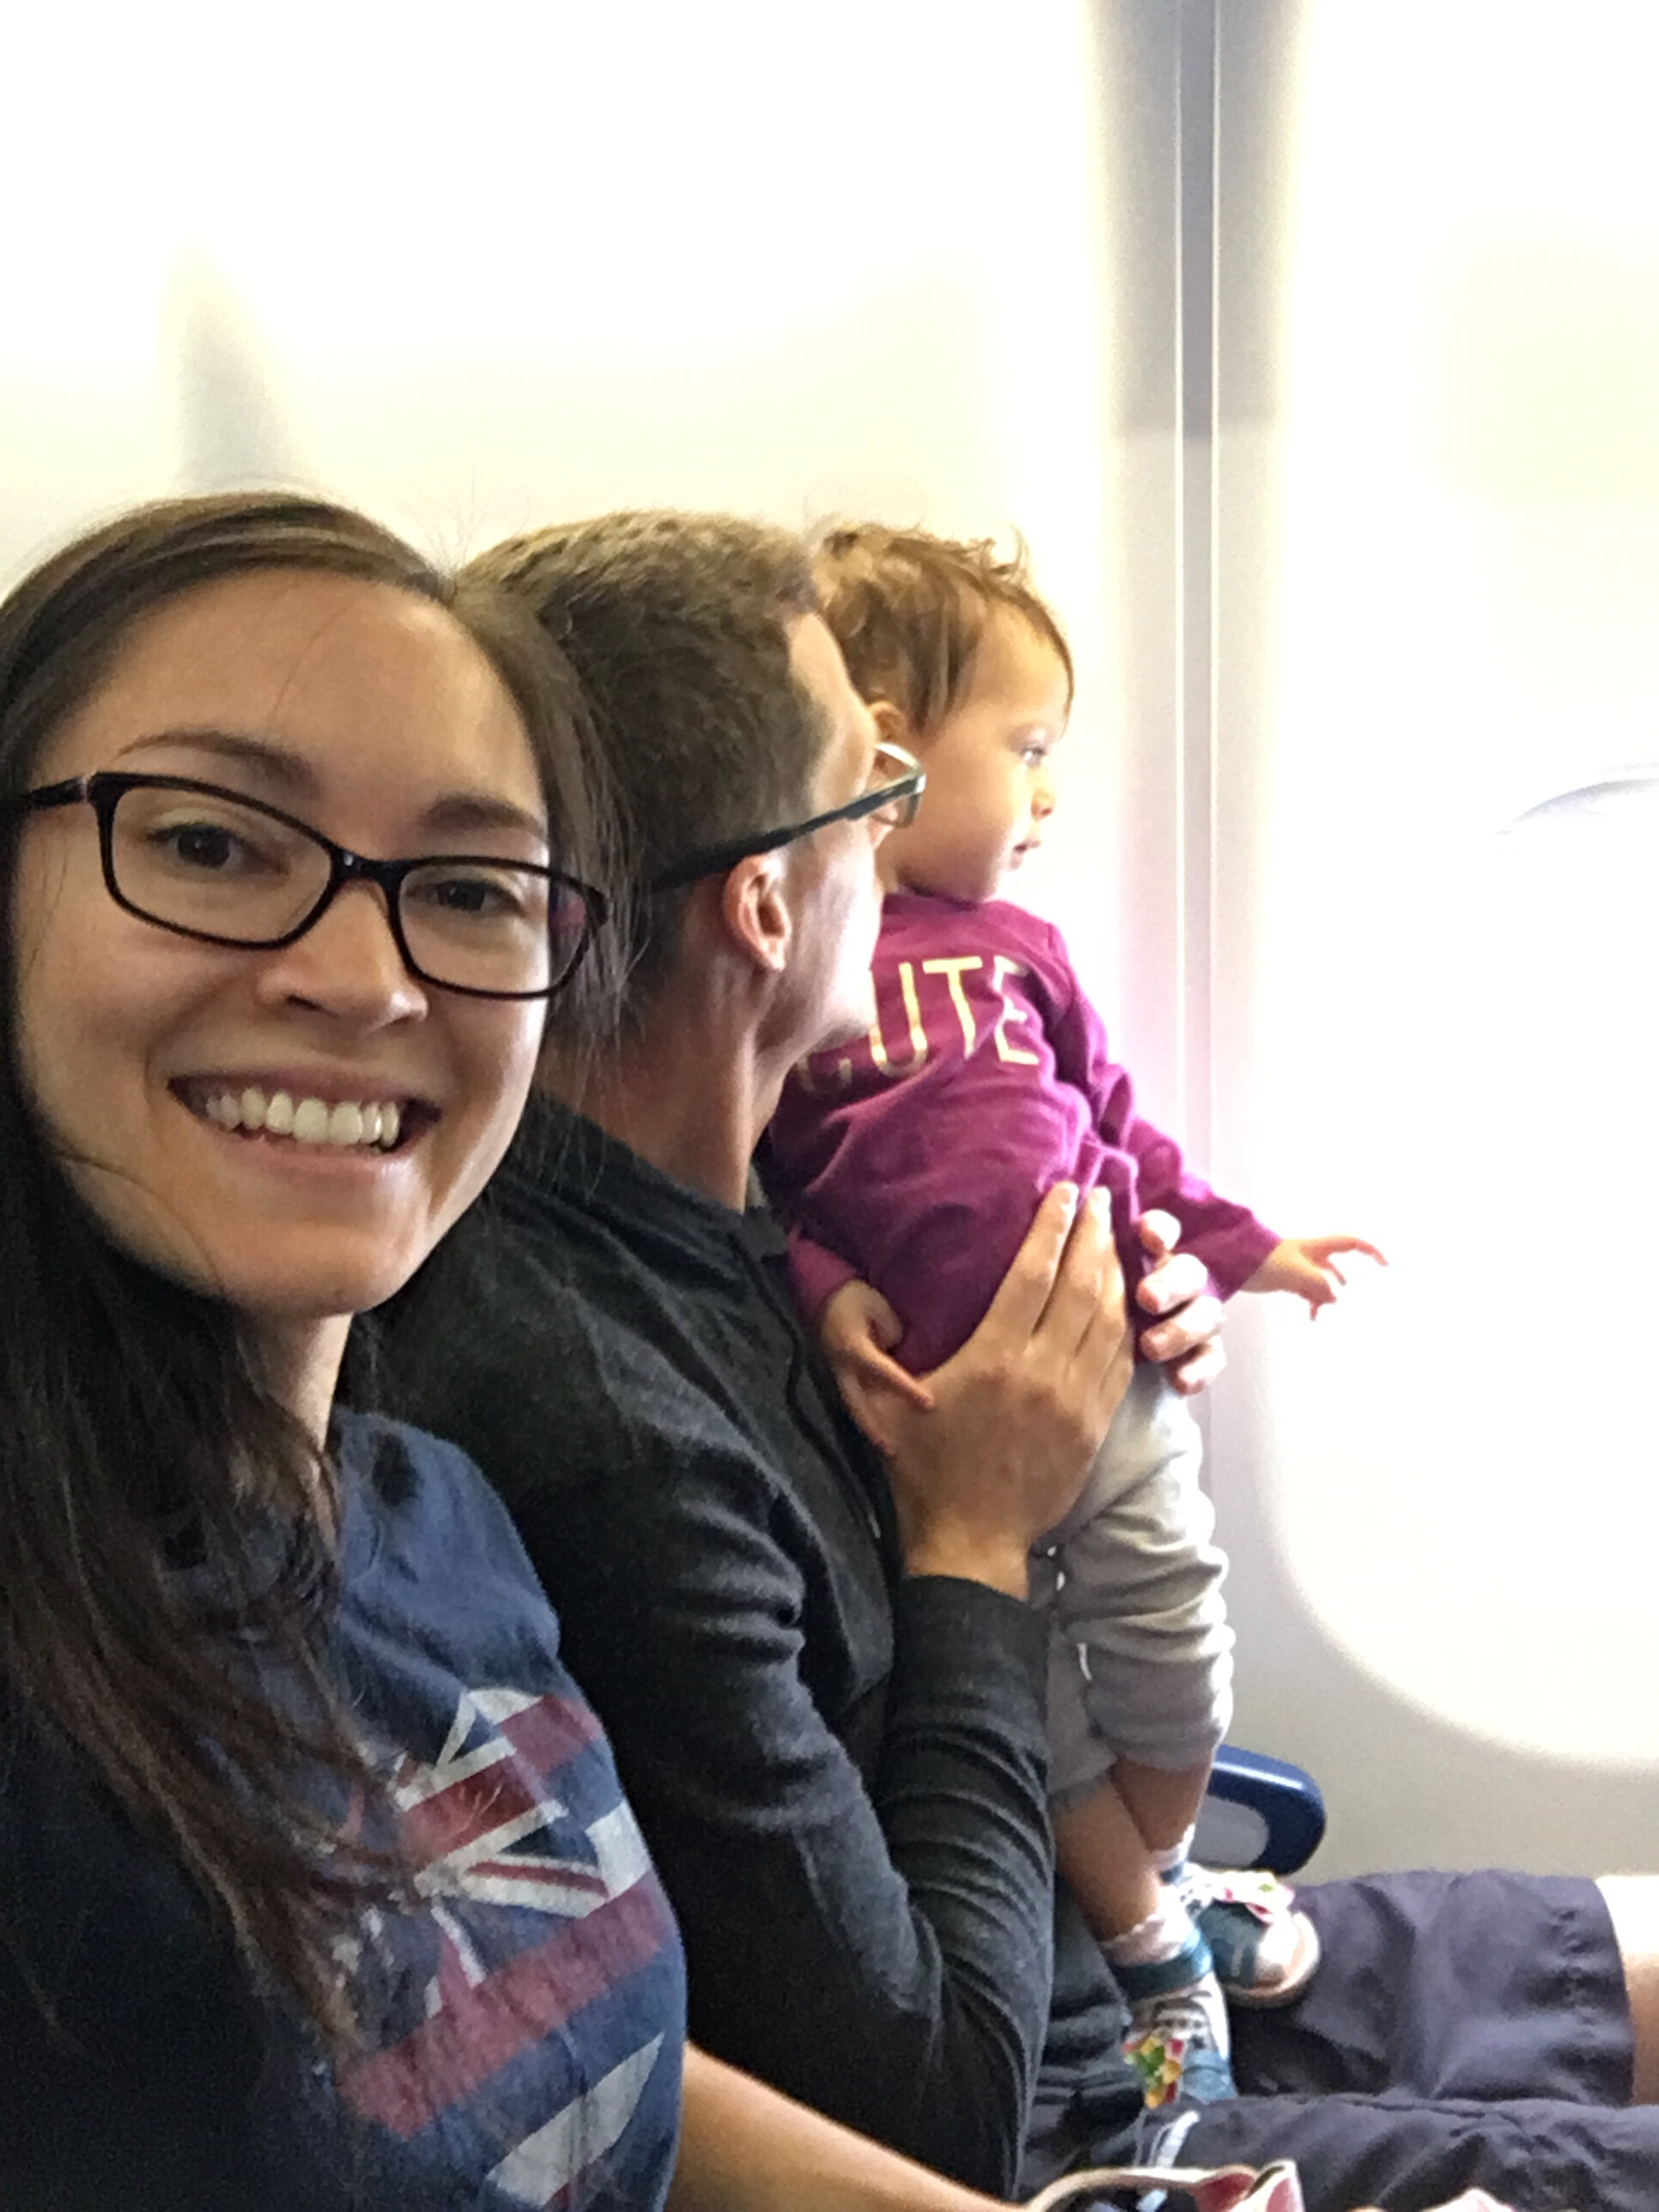 11 helpful tips on flying with a toddler, challenge accepted. Visit shortsweetmom.com for these helpful travel tips or pin for later. 